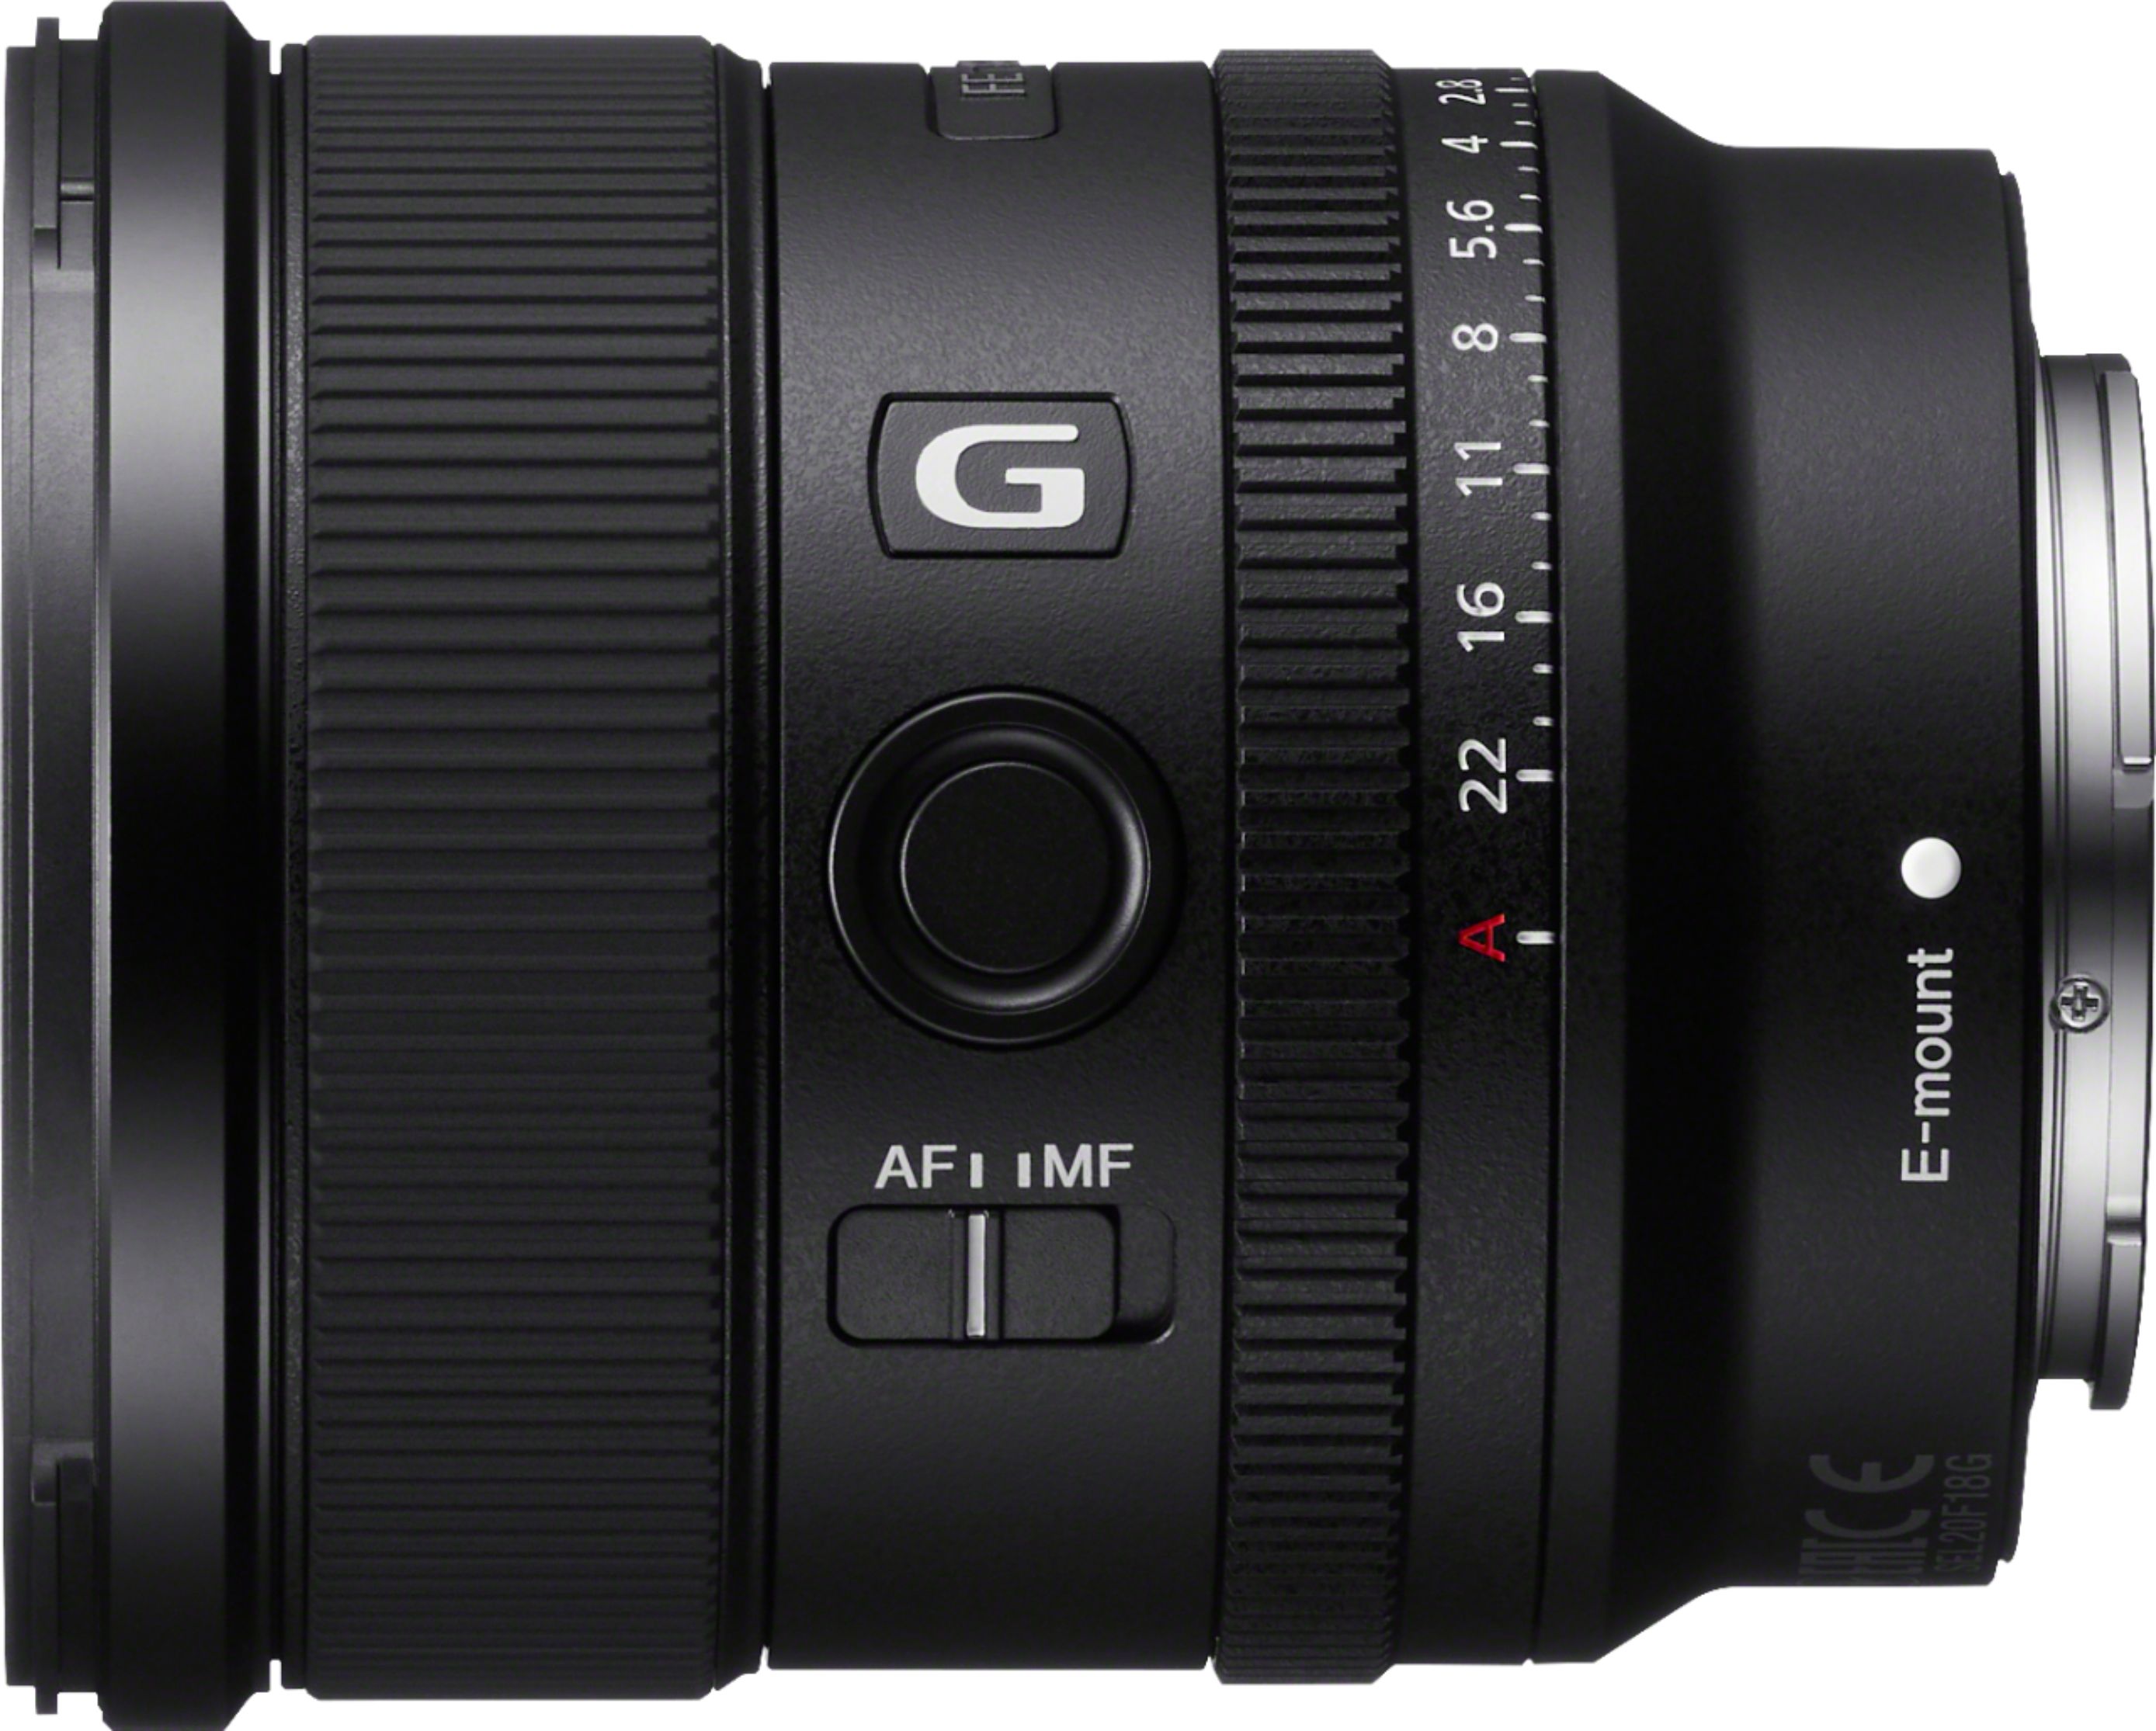 Sony FE 20mm f/1.8 G Ultra Wide Angle Prime Lens for E-mount ...